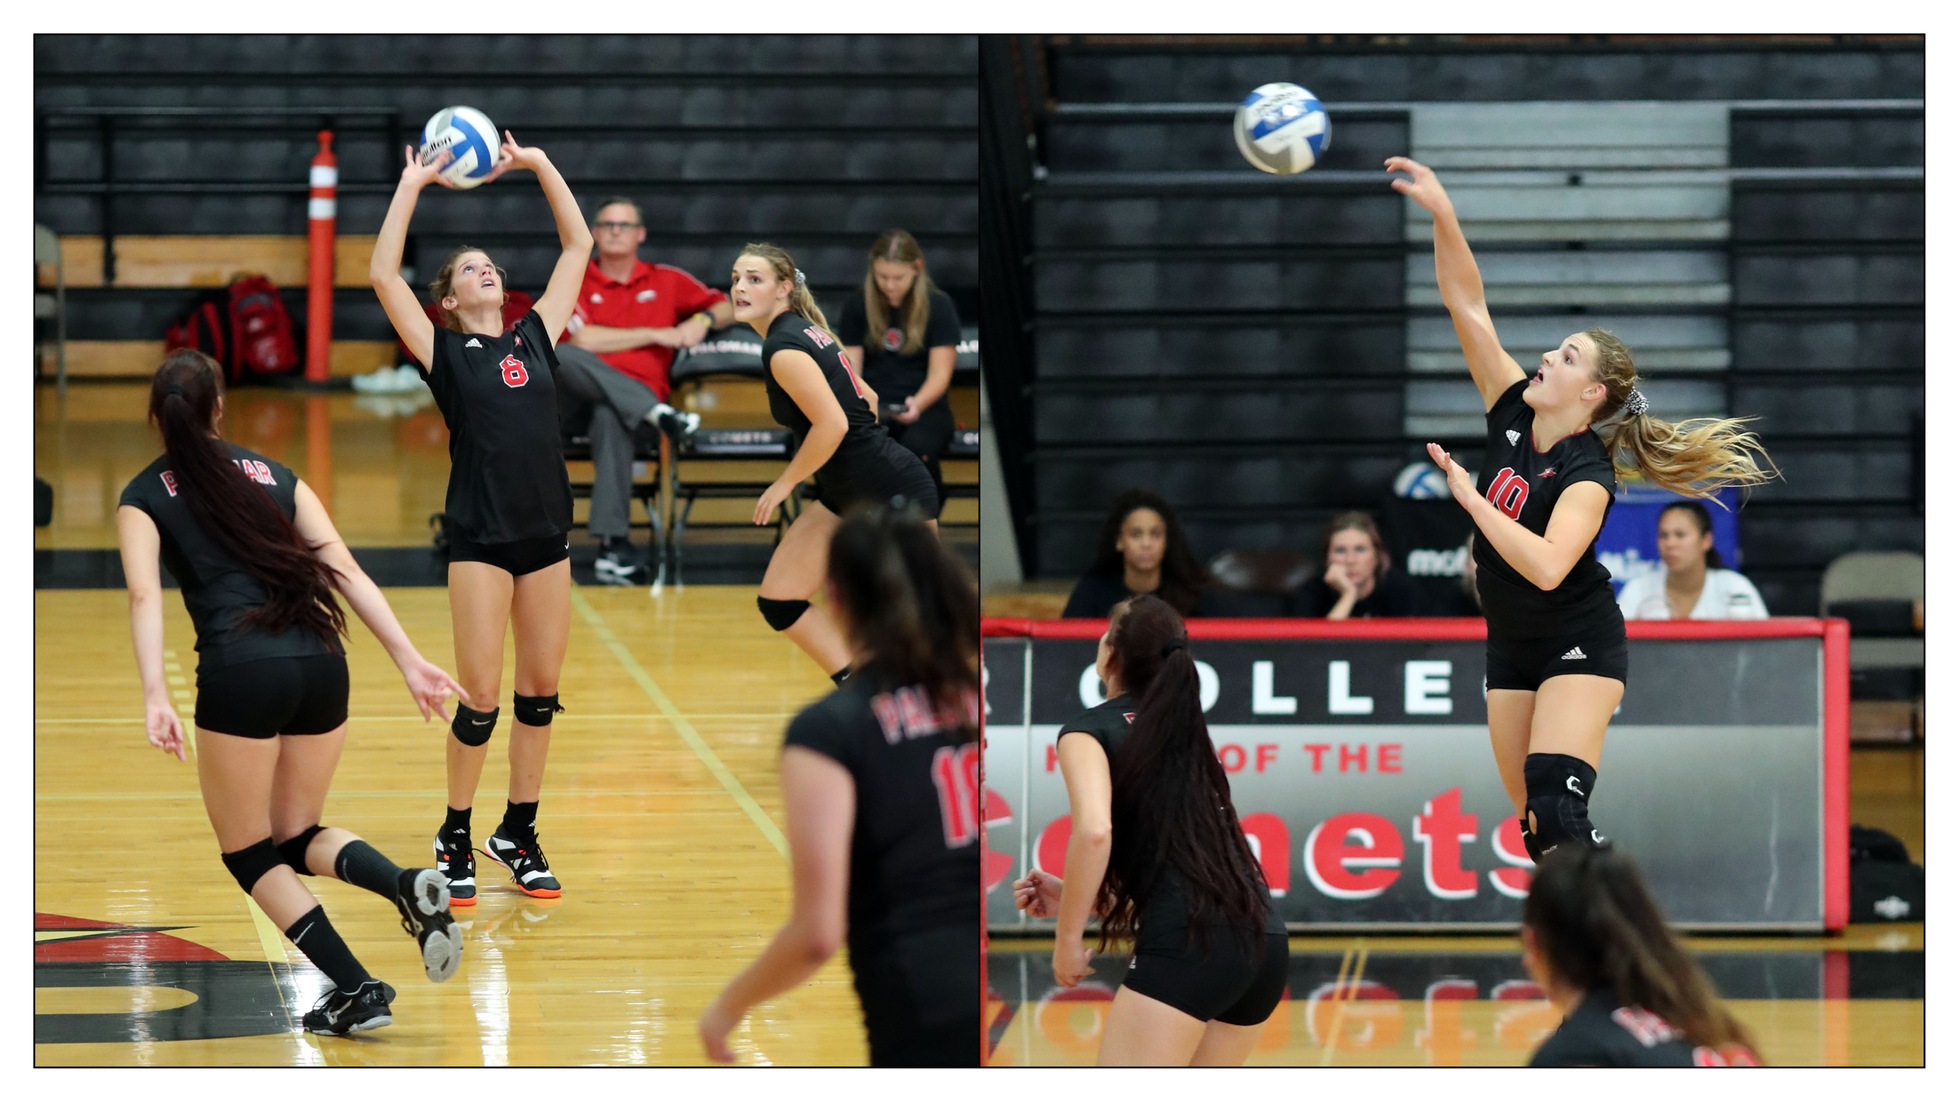 Carsyn Emerson (left) and Alina Lecakes-Jones received All-PCAC Honorable Mention honors. Photos by Hugh Cox.